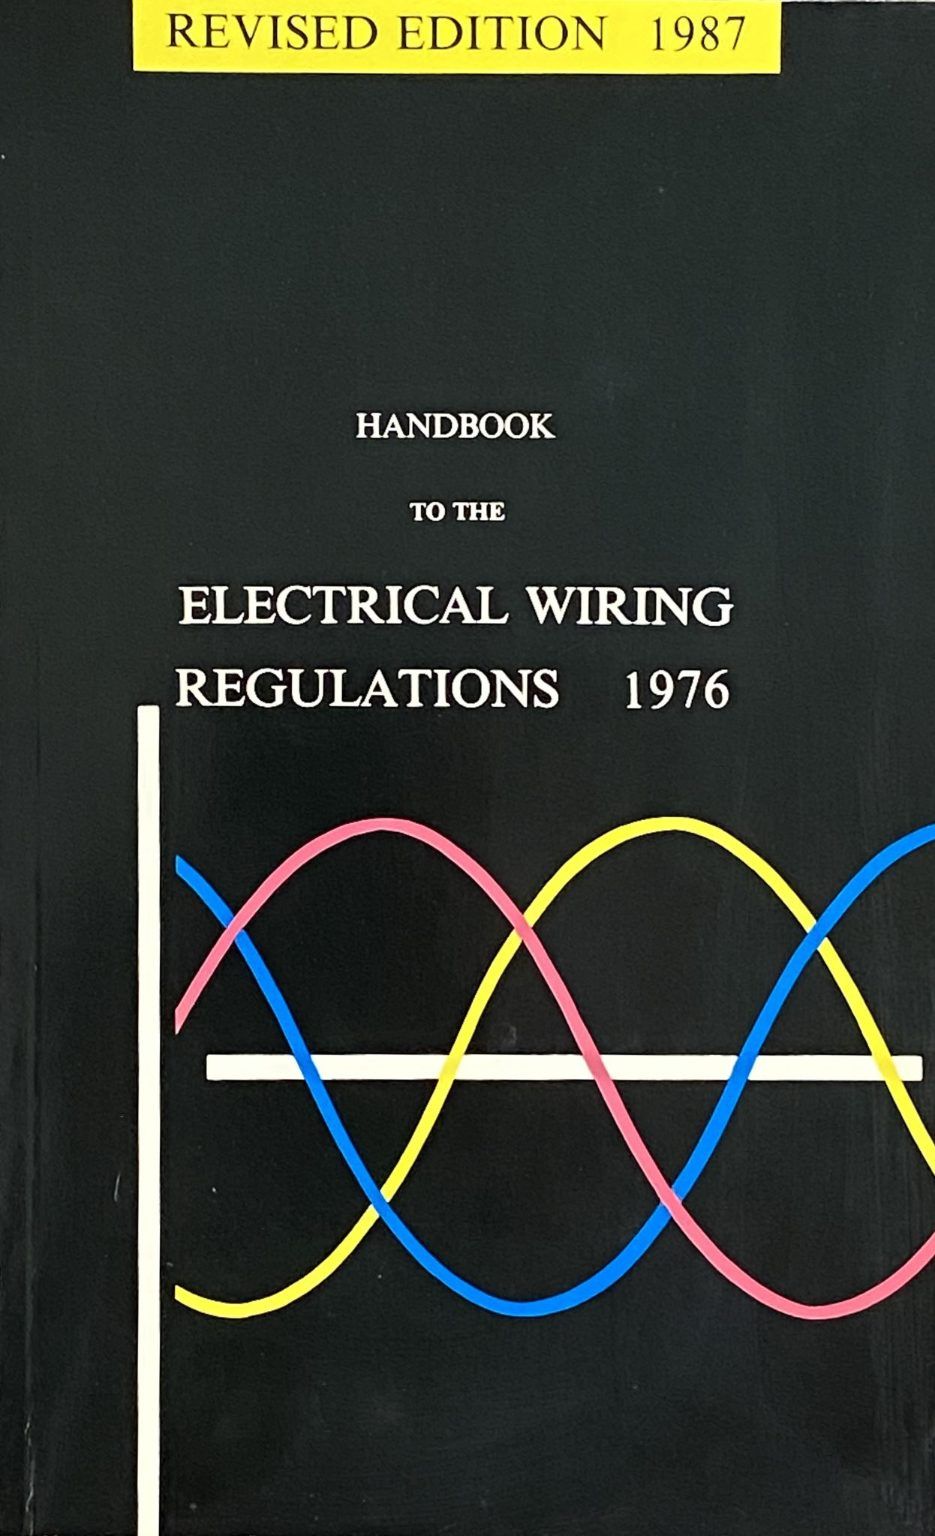 ELECTRICAL WIRING REGULATIONS 1976